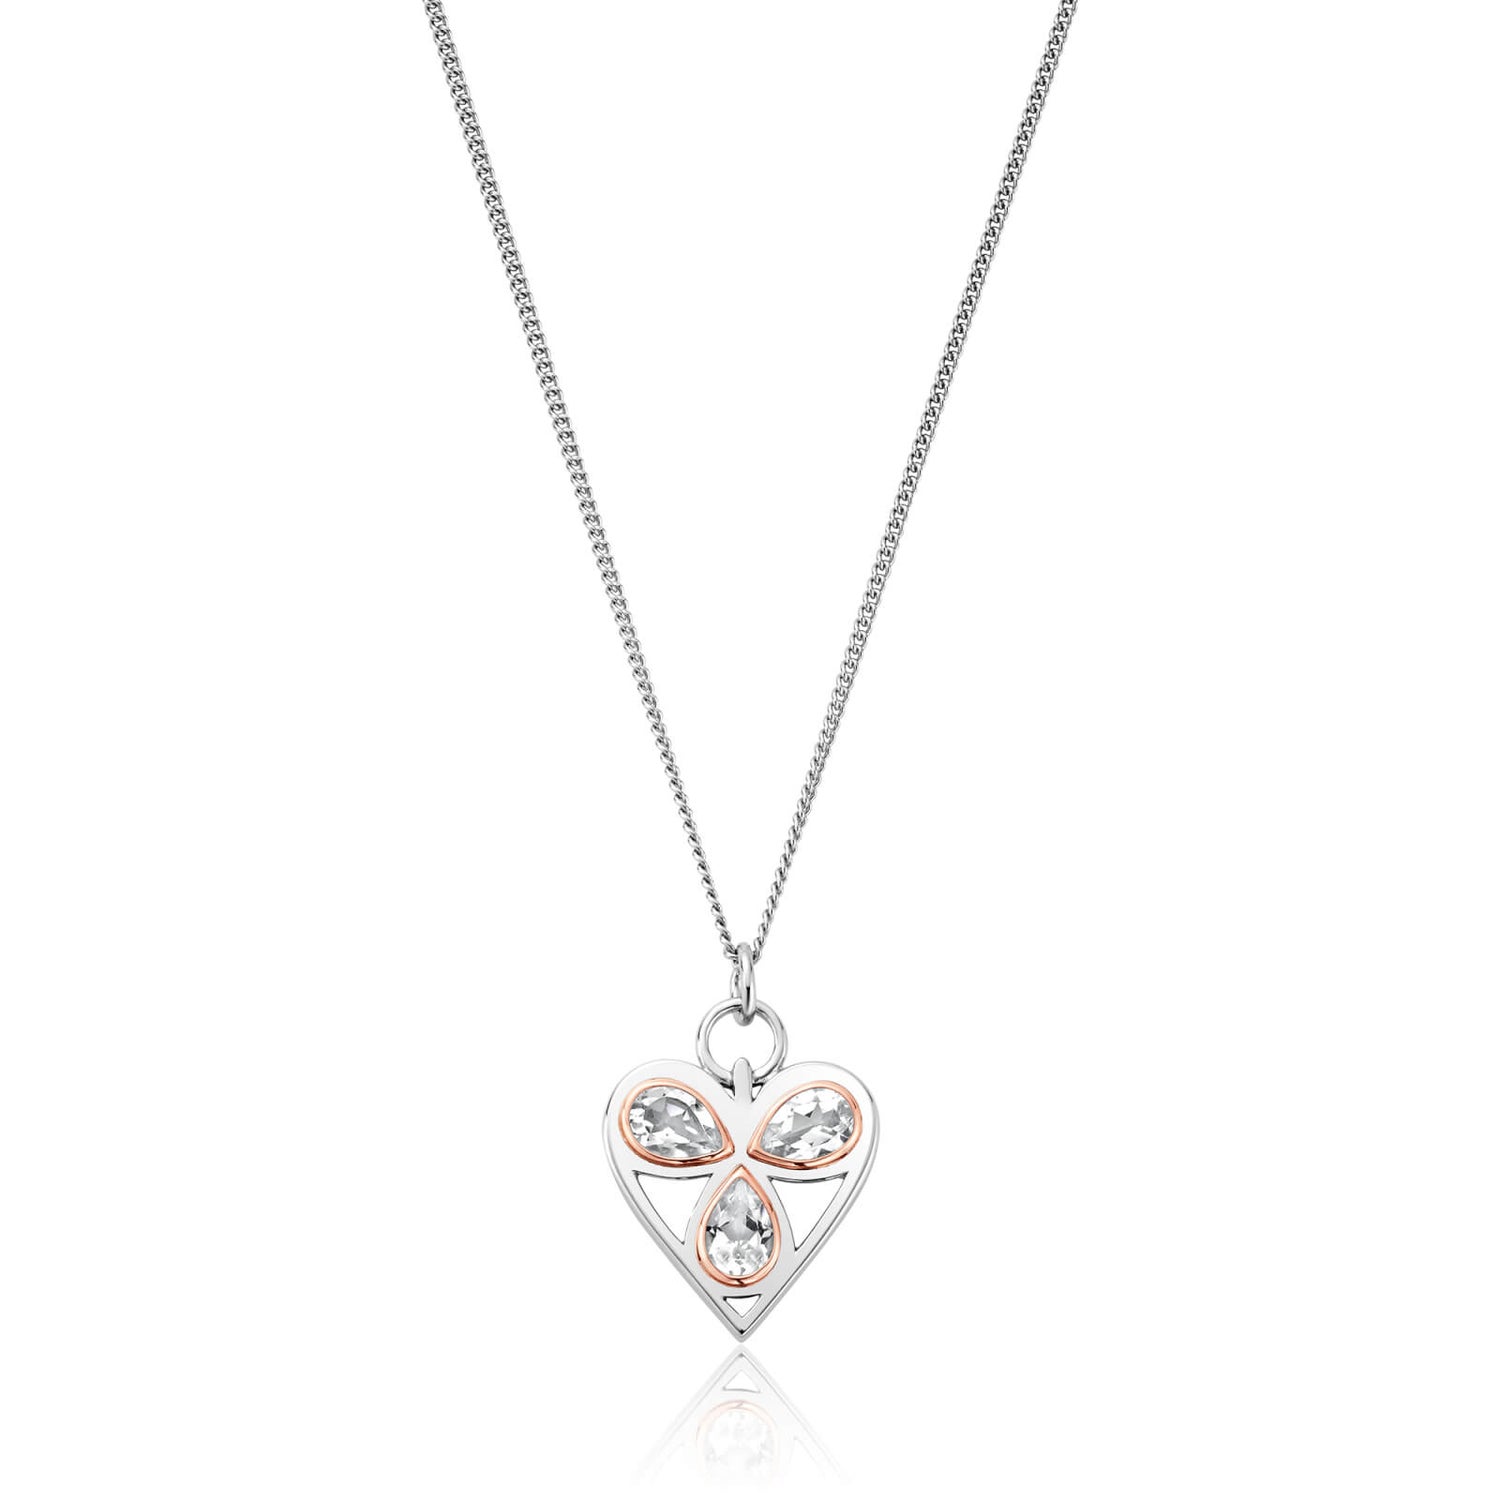 Clogau 9ct Rose Gold And Sterling Silver Clogau Heart Pendant 3.4 Grams 375-925. 